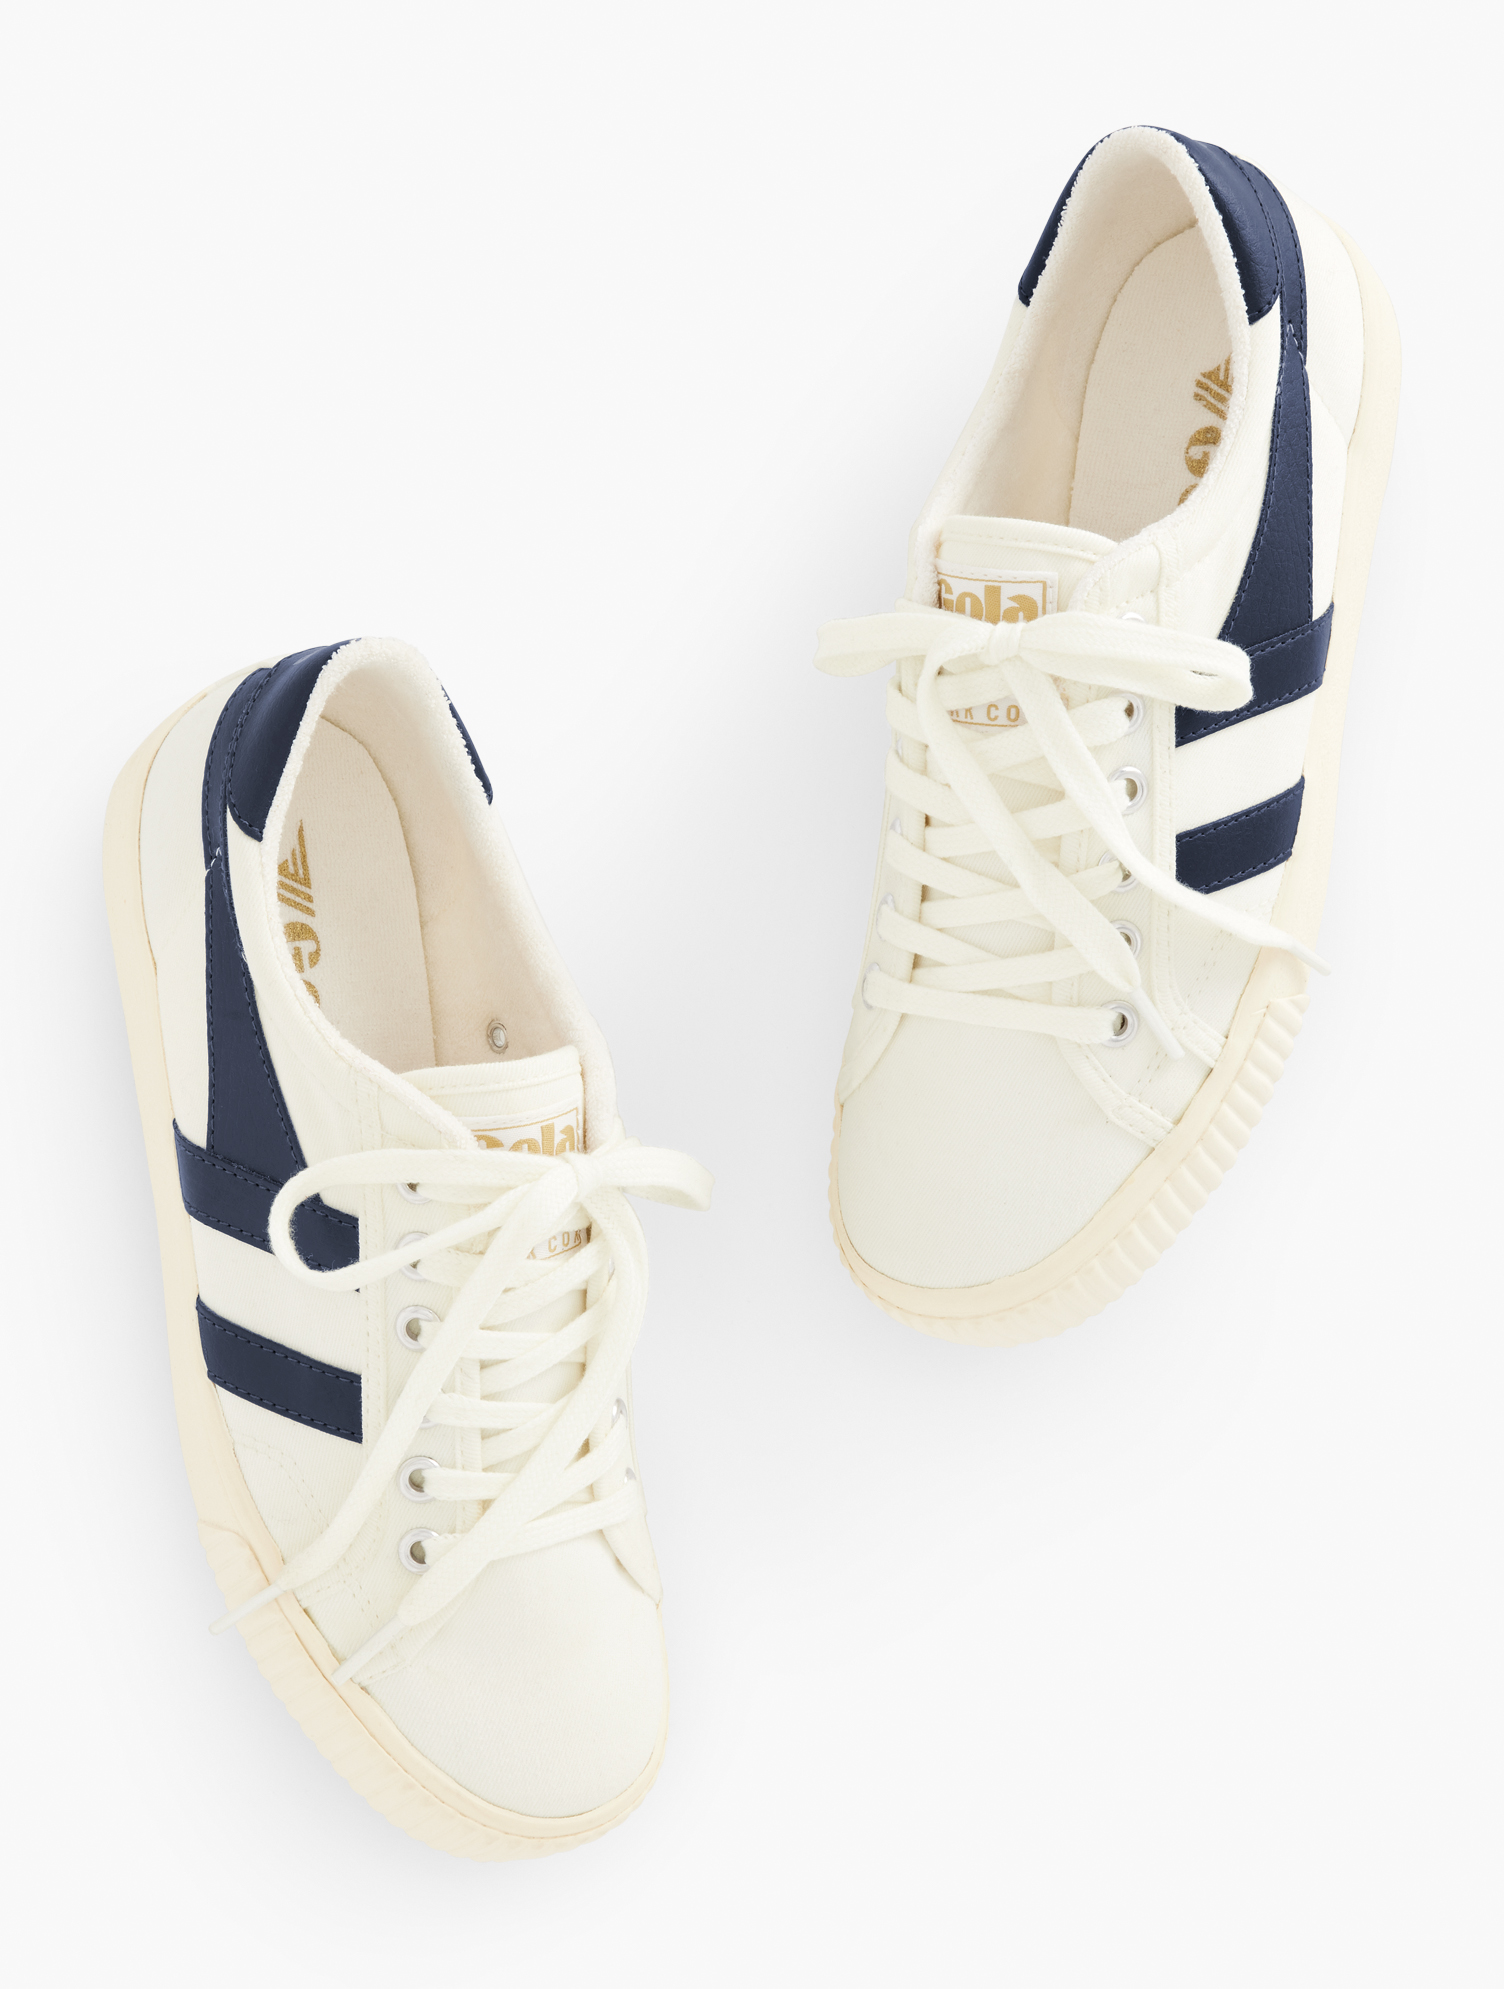 Talbots Â® Mark Cox Tennis Sneakers - Off White/navy Blue - 9 1/2 M - 100% Cotton  In Off White,navy Blue